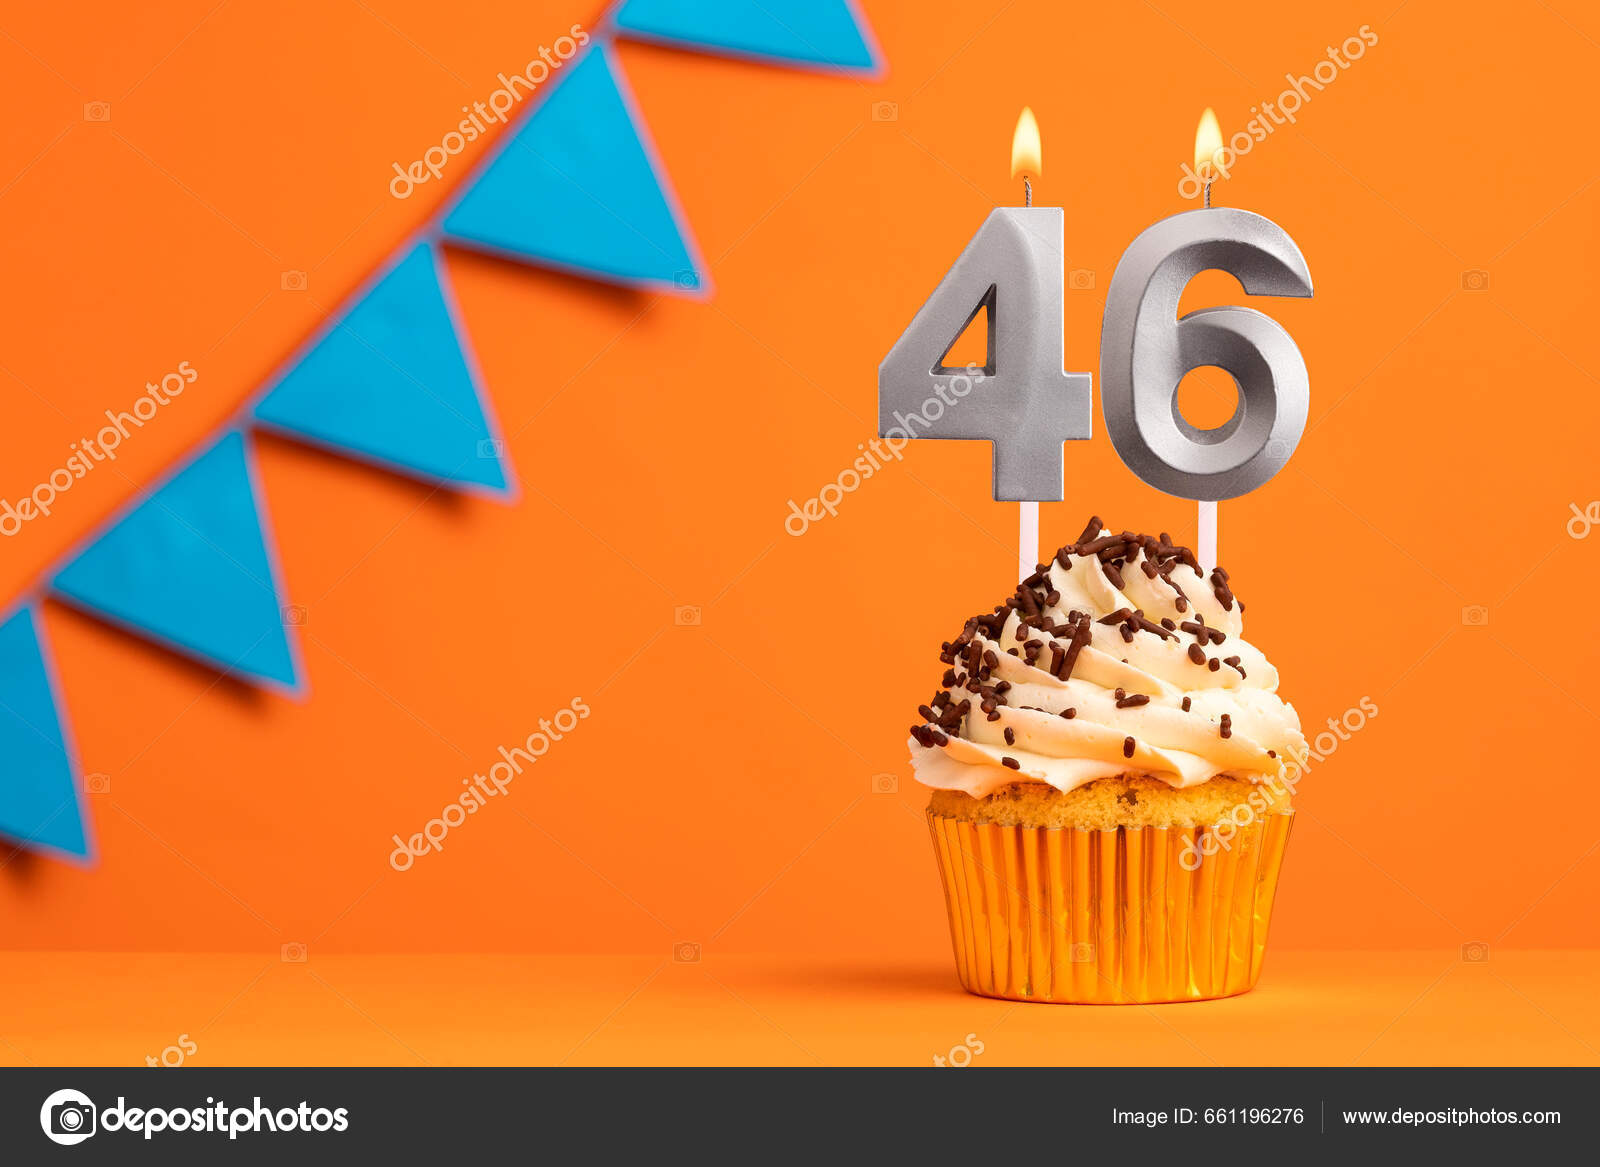 Aggregate more than 84 number cake images latest - awesomeenglish.edu.vn